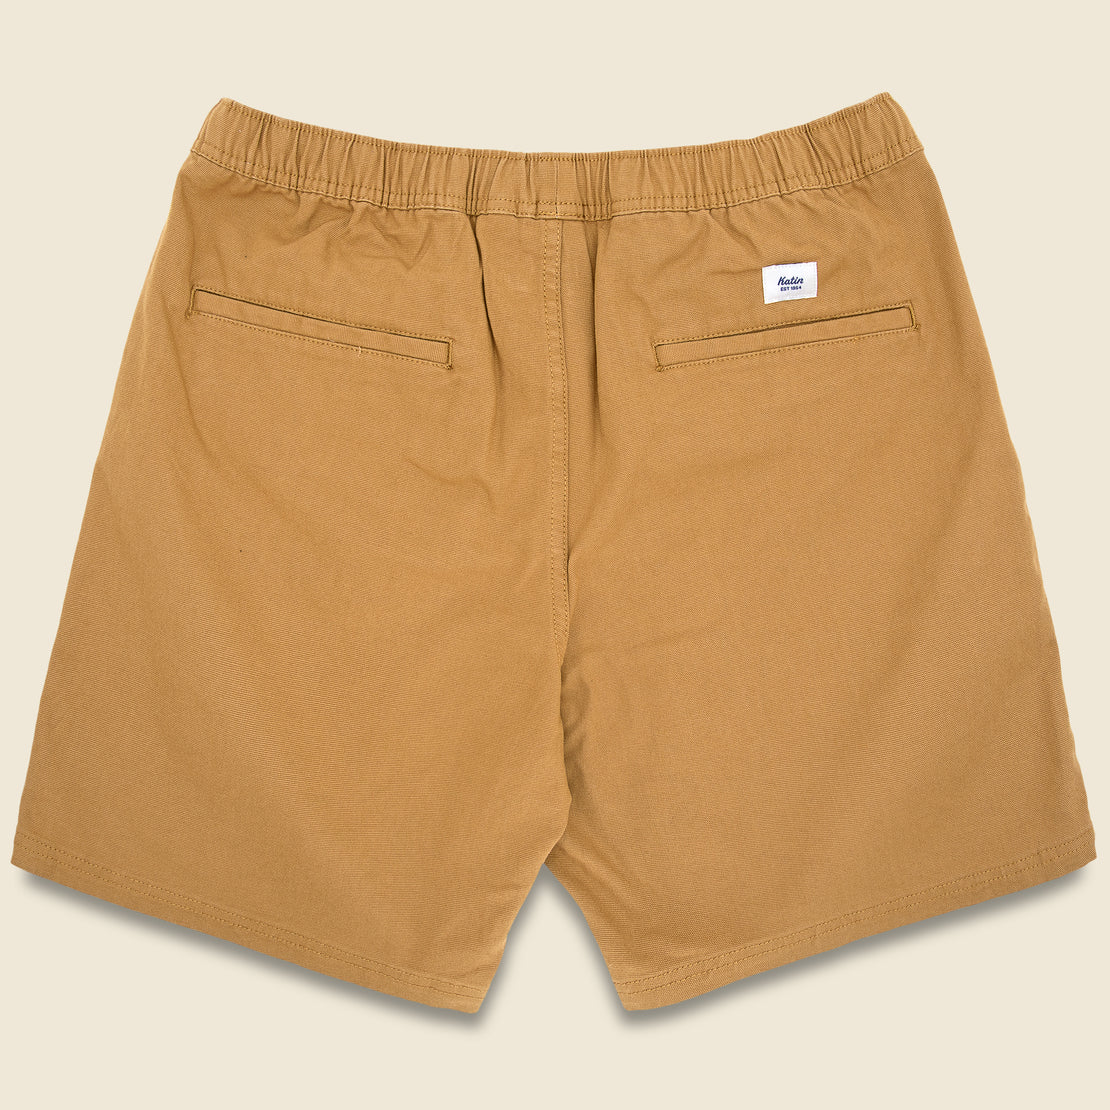 Trails Short - Driftwood - Katin - STAG Provisions - Shorts - Lounge